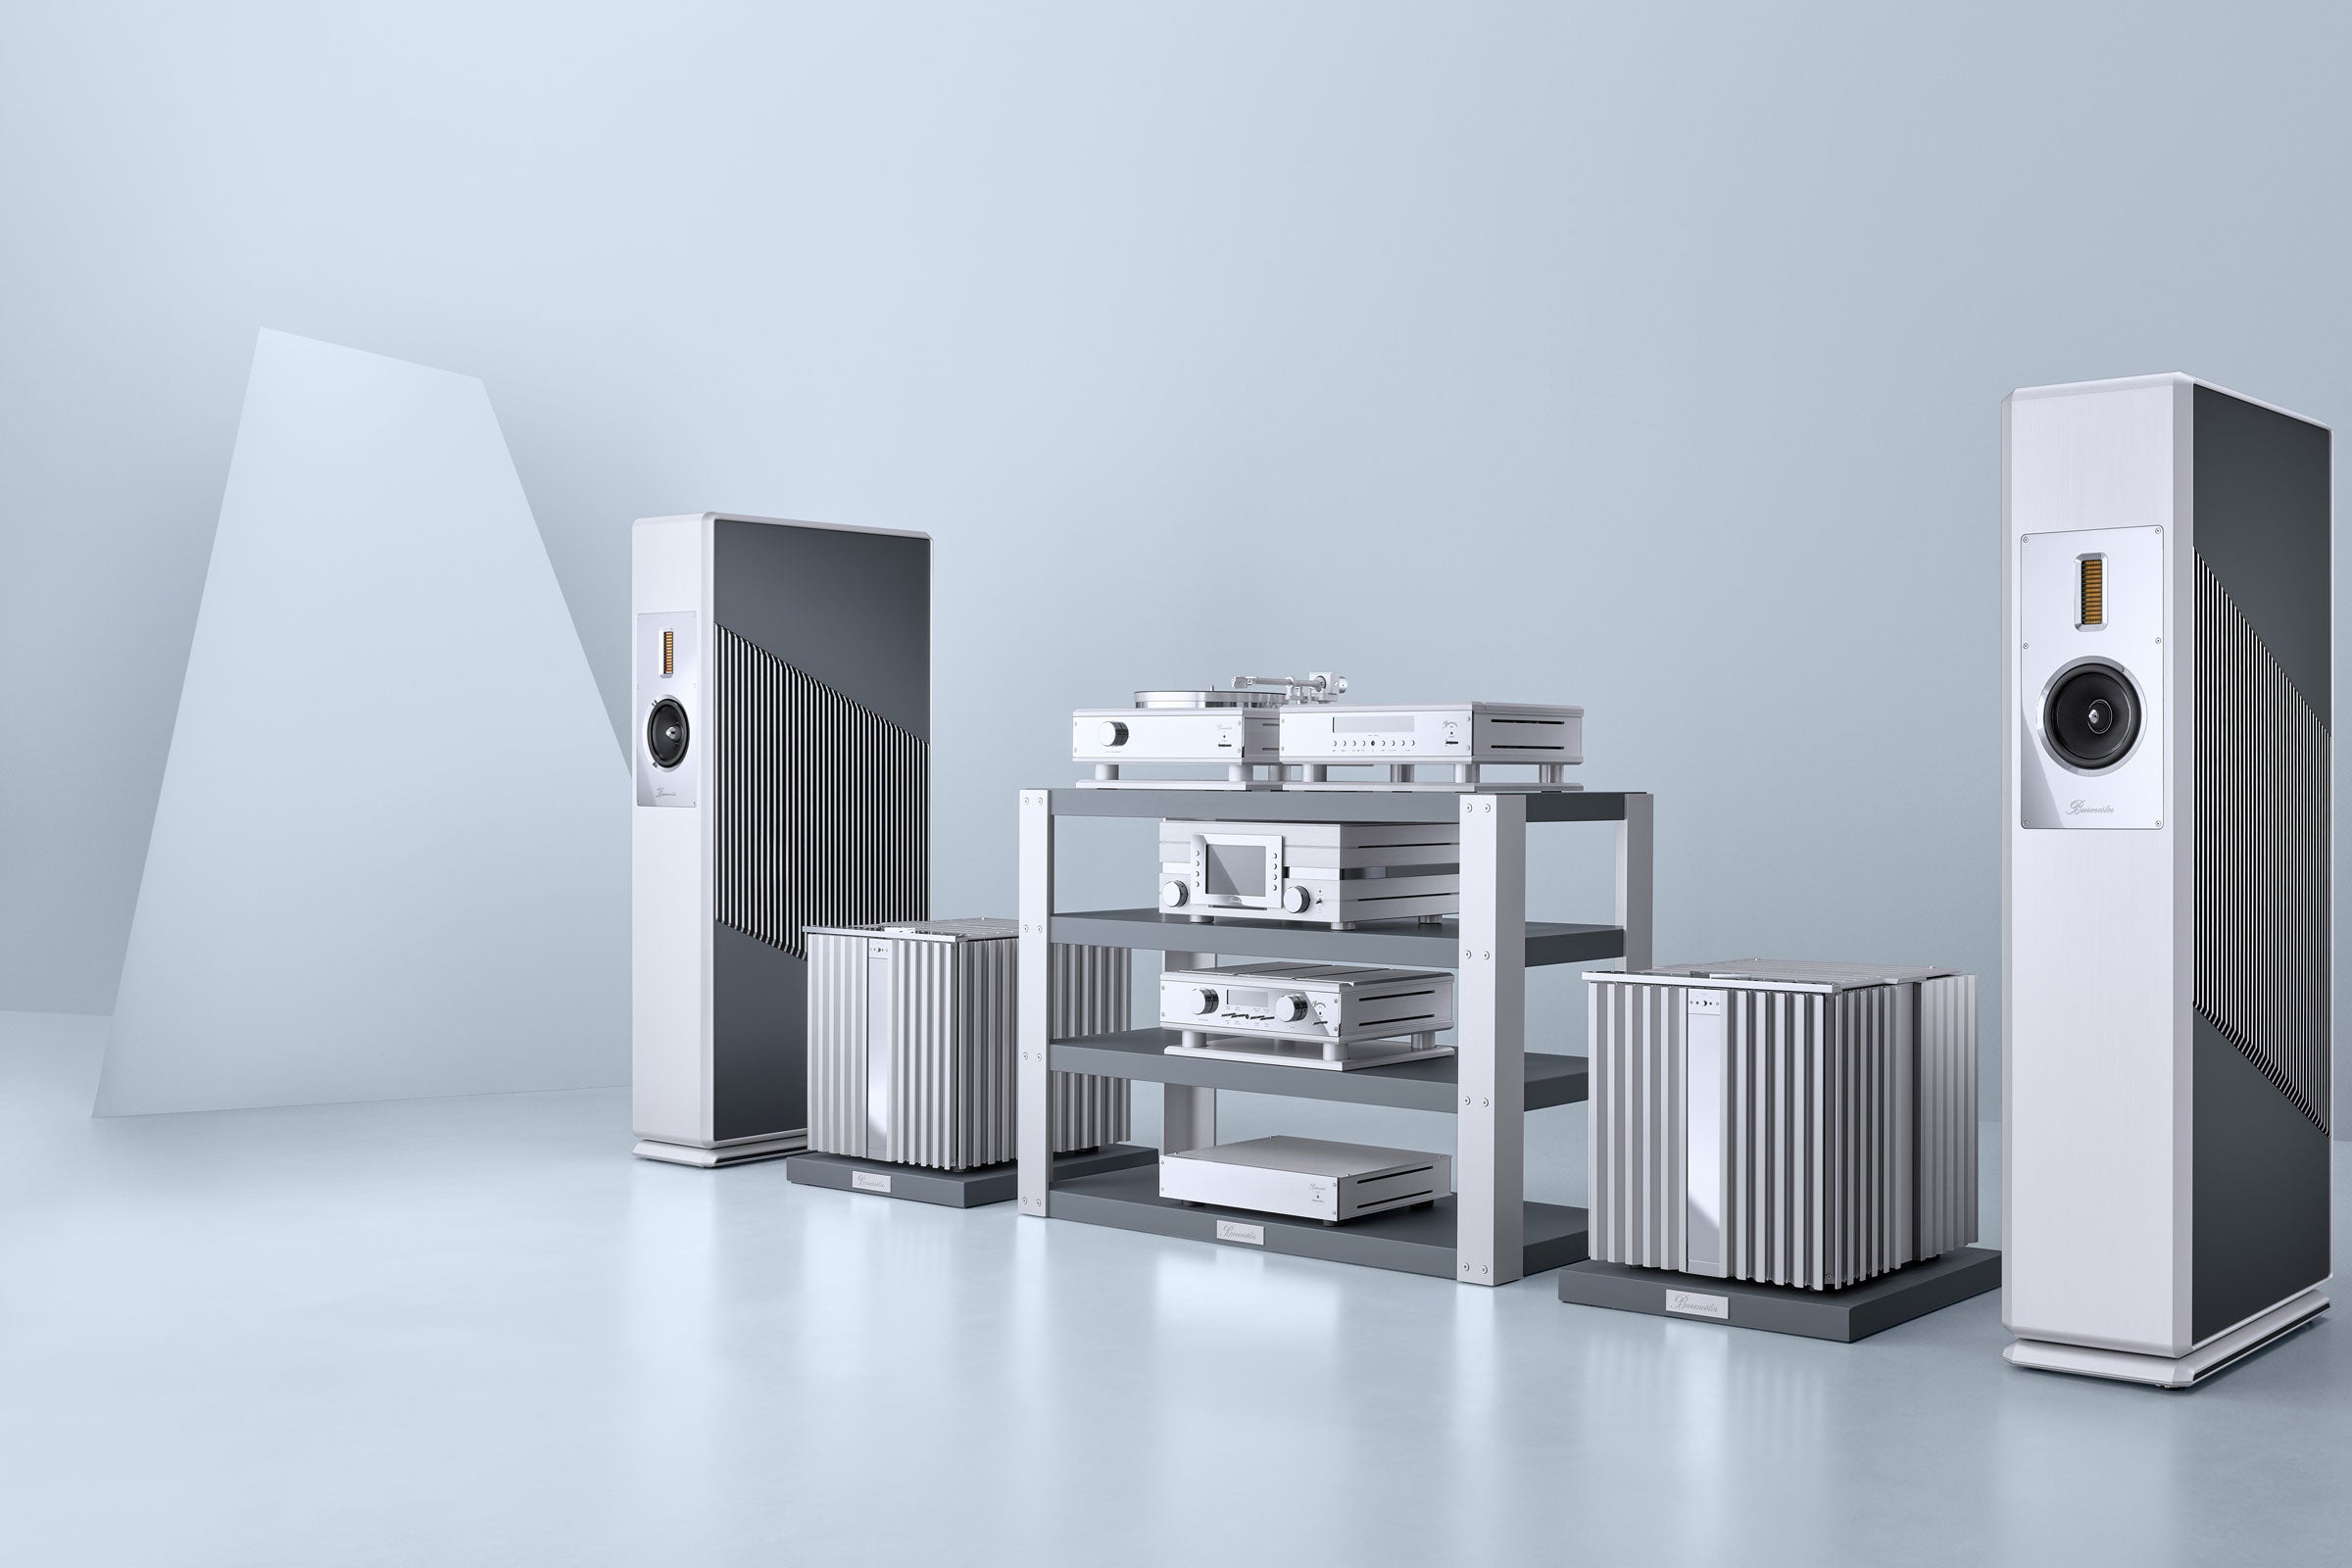 Burmester passion is to create the best sound experiences in all environments